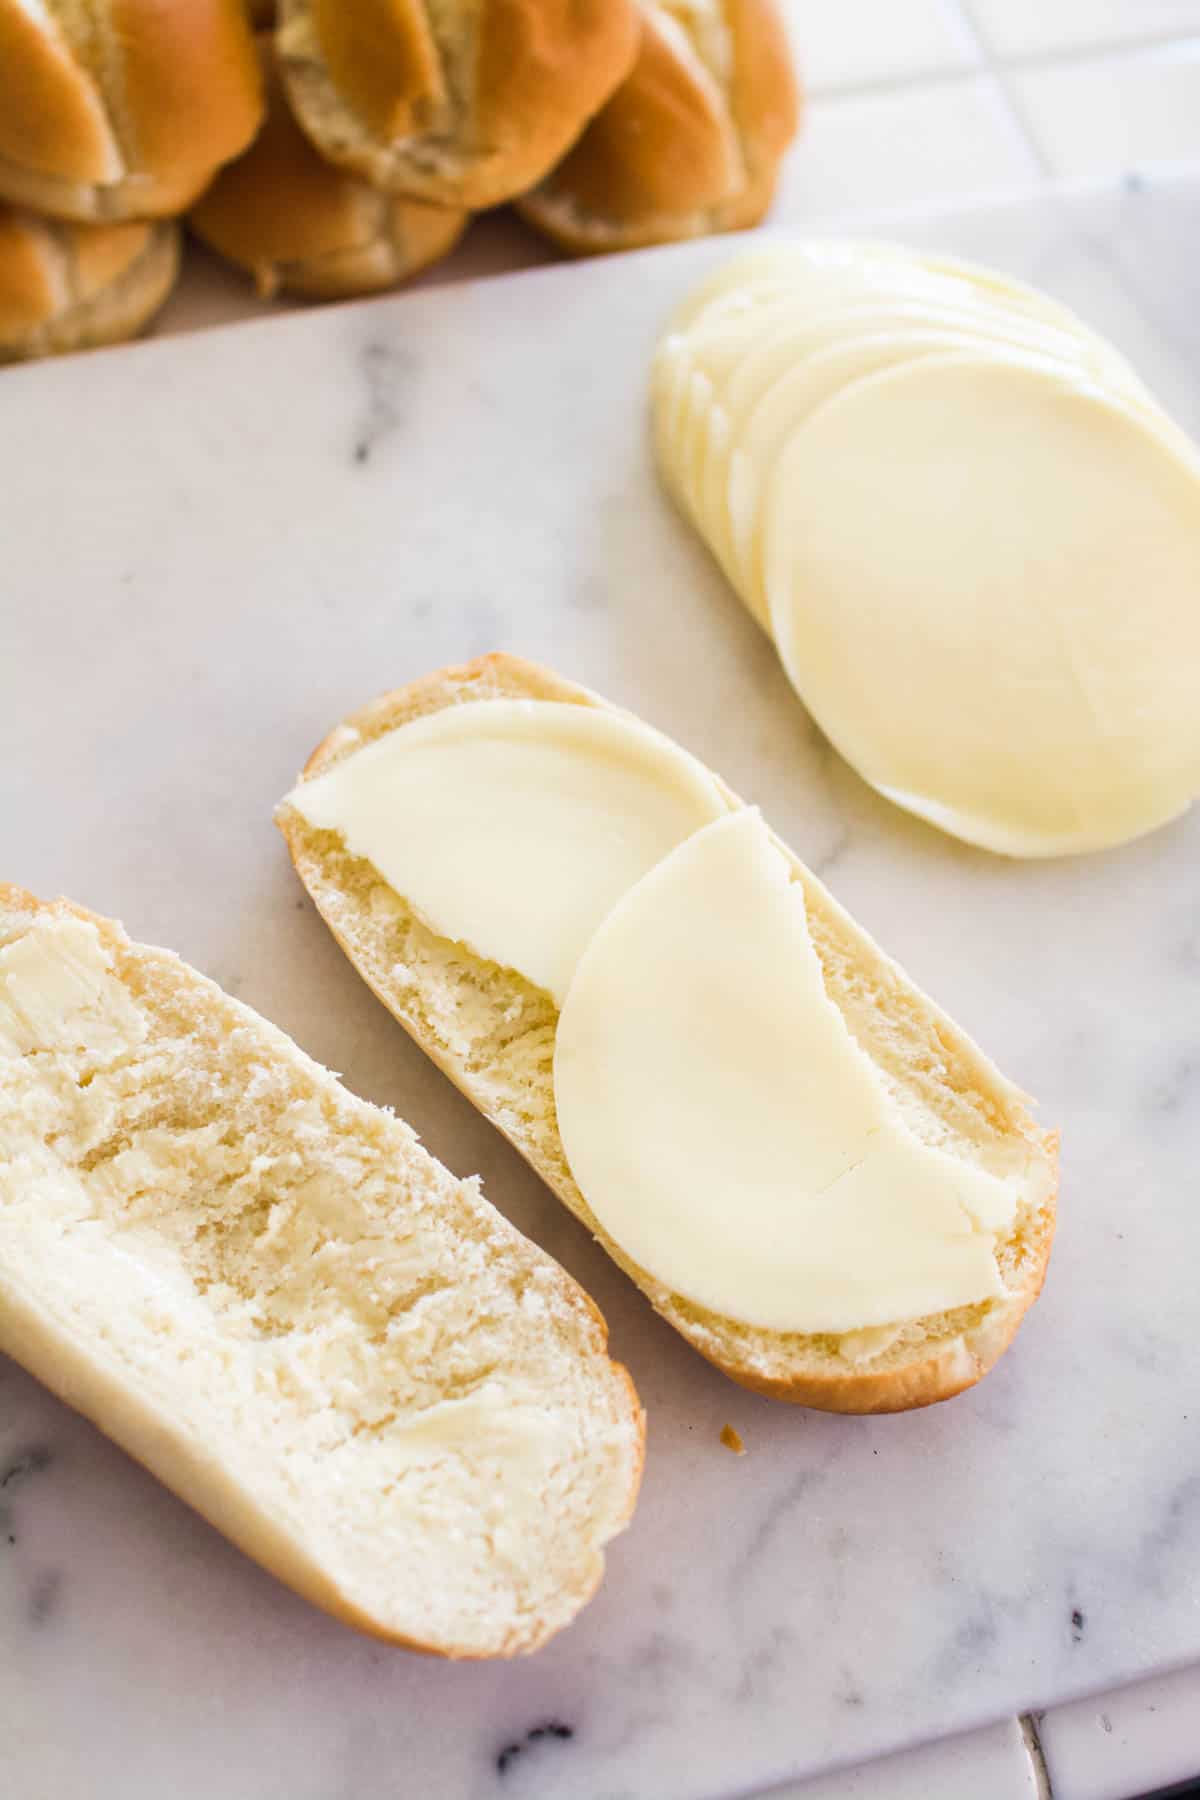 An open sandwich roll with provolone slices laying on one side.